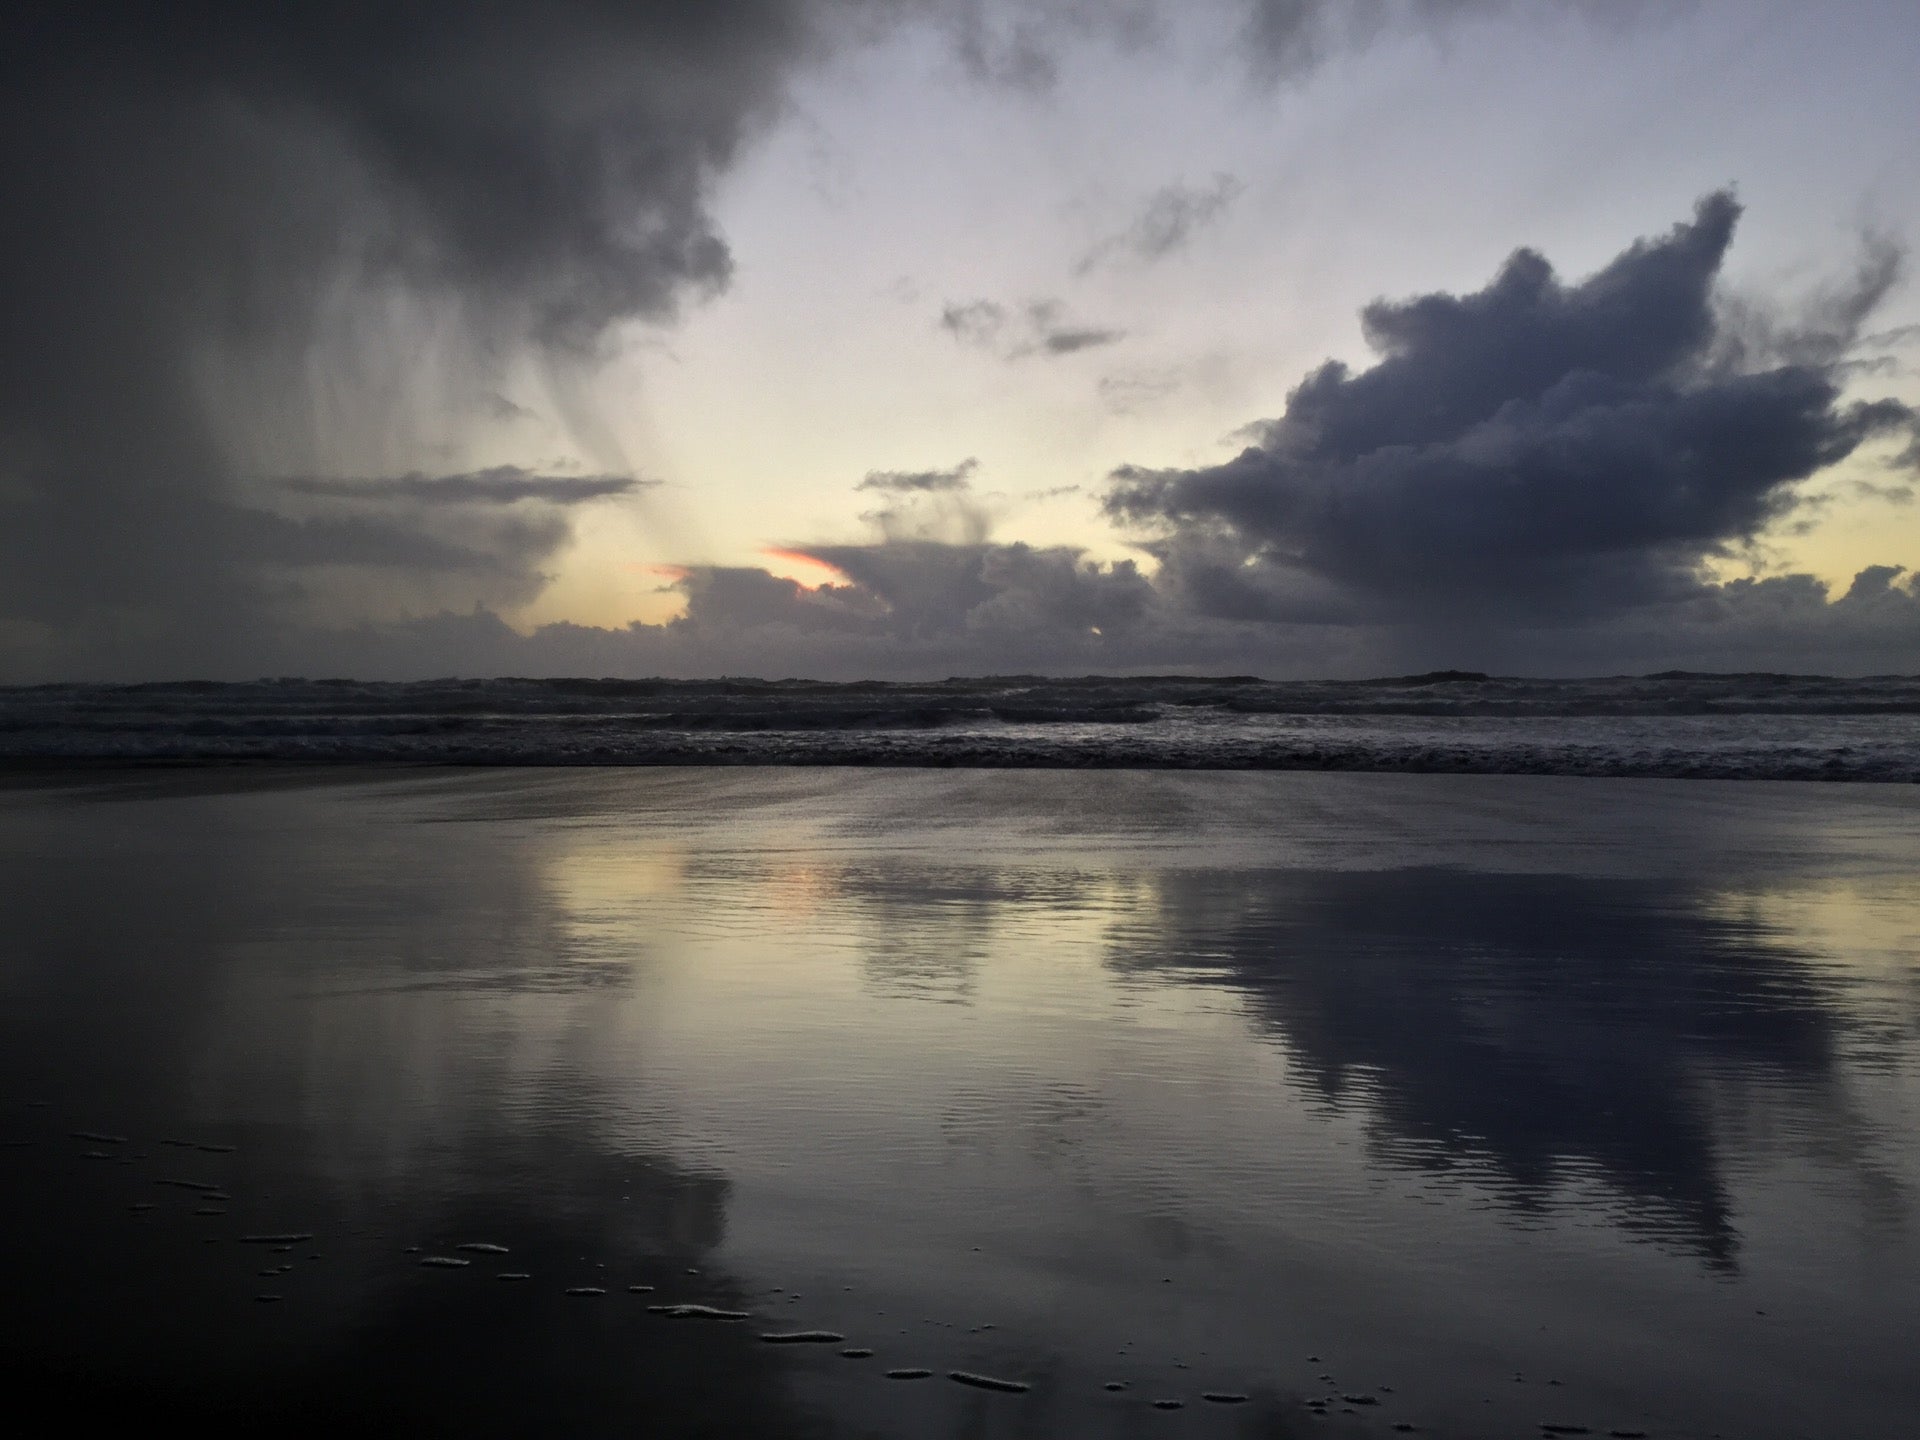 Dramatic Clouds Last Night At Ocean Beach No Sign Of The Setting Sun Except A Distant Orange Glow Under The Clouds Above The Ocean Lighting Up Strands Of Rain Returning To